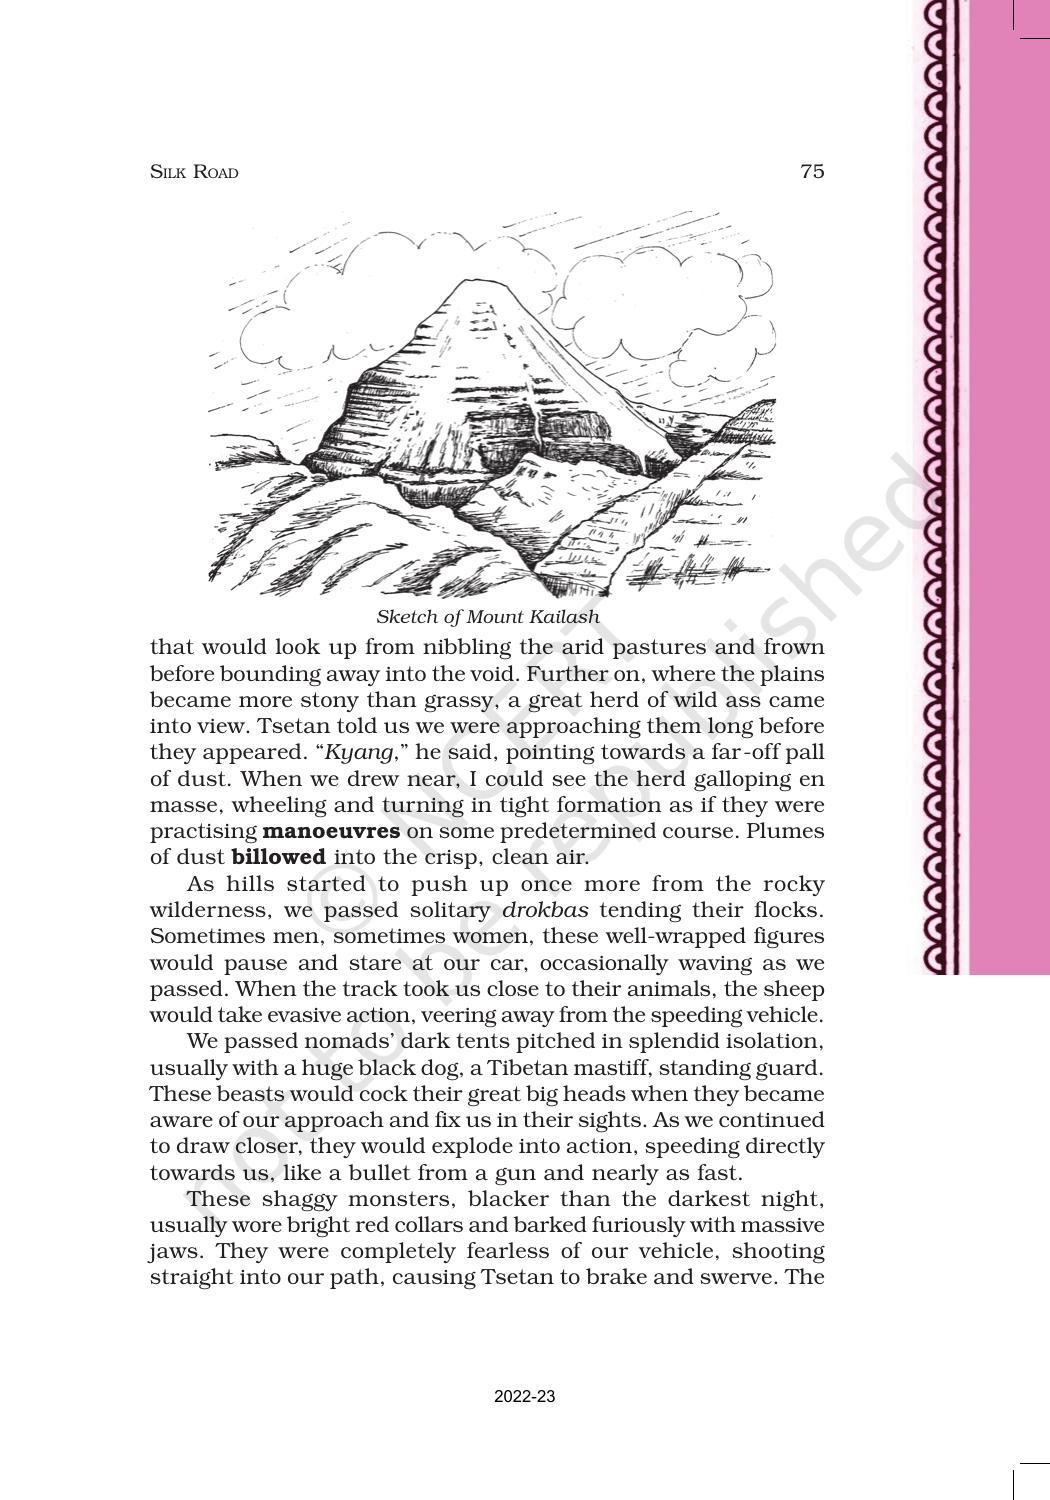 NCERT Book for Class 11 English Hornbill Chapter 8 Silk Road - Page 2